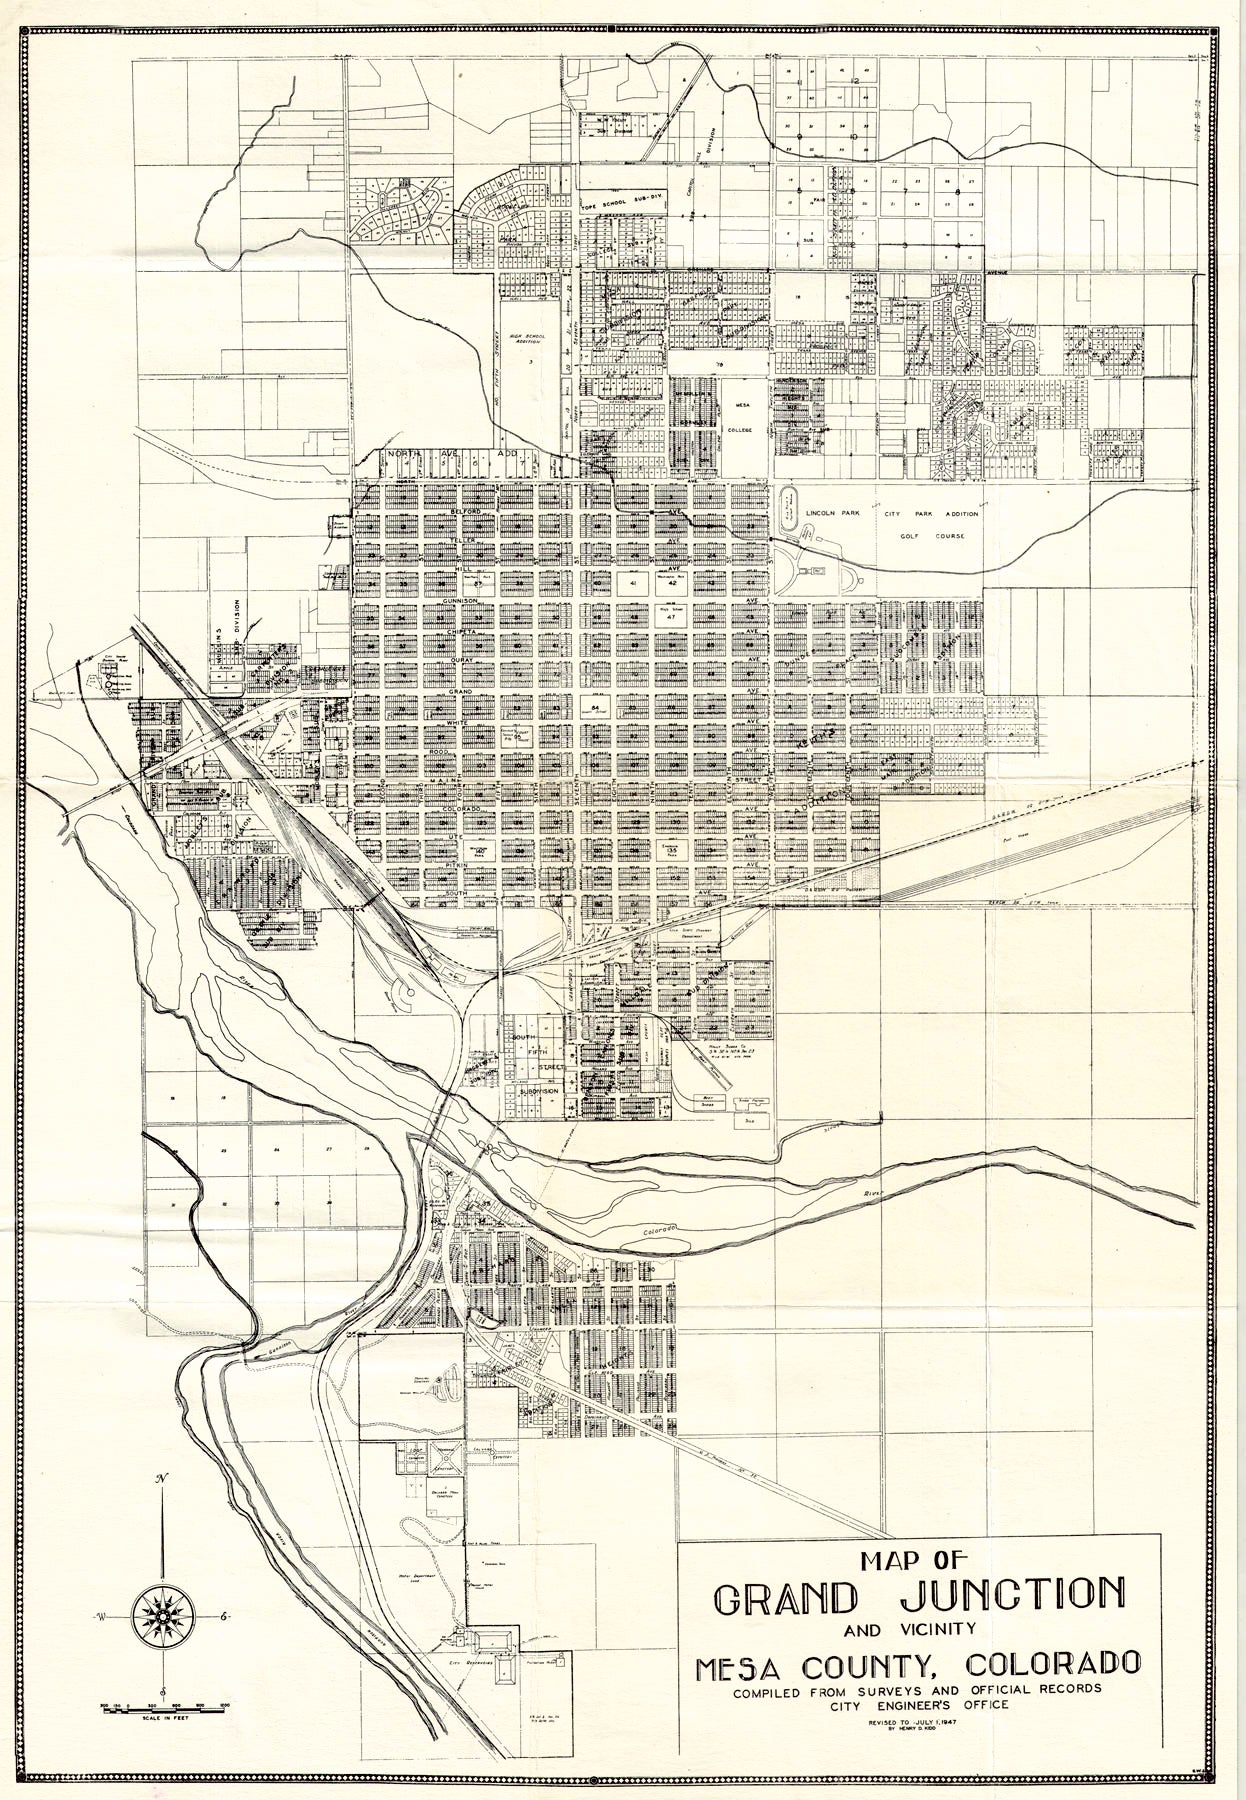 (CO.- Grand Junction) Map Of Grand Junction And Vicinity - Mesa County, Colorado...,   Kidd - C.O.C., 1947